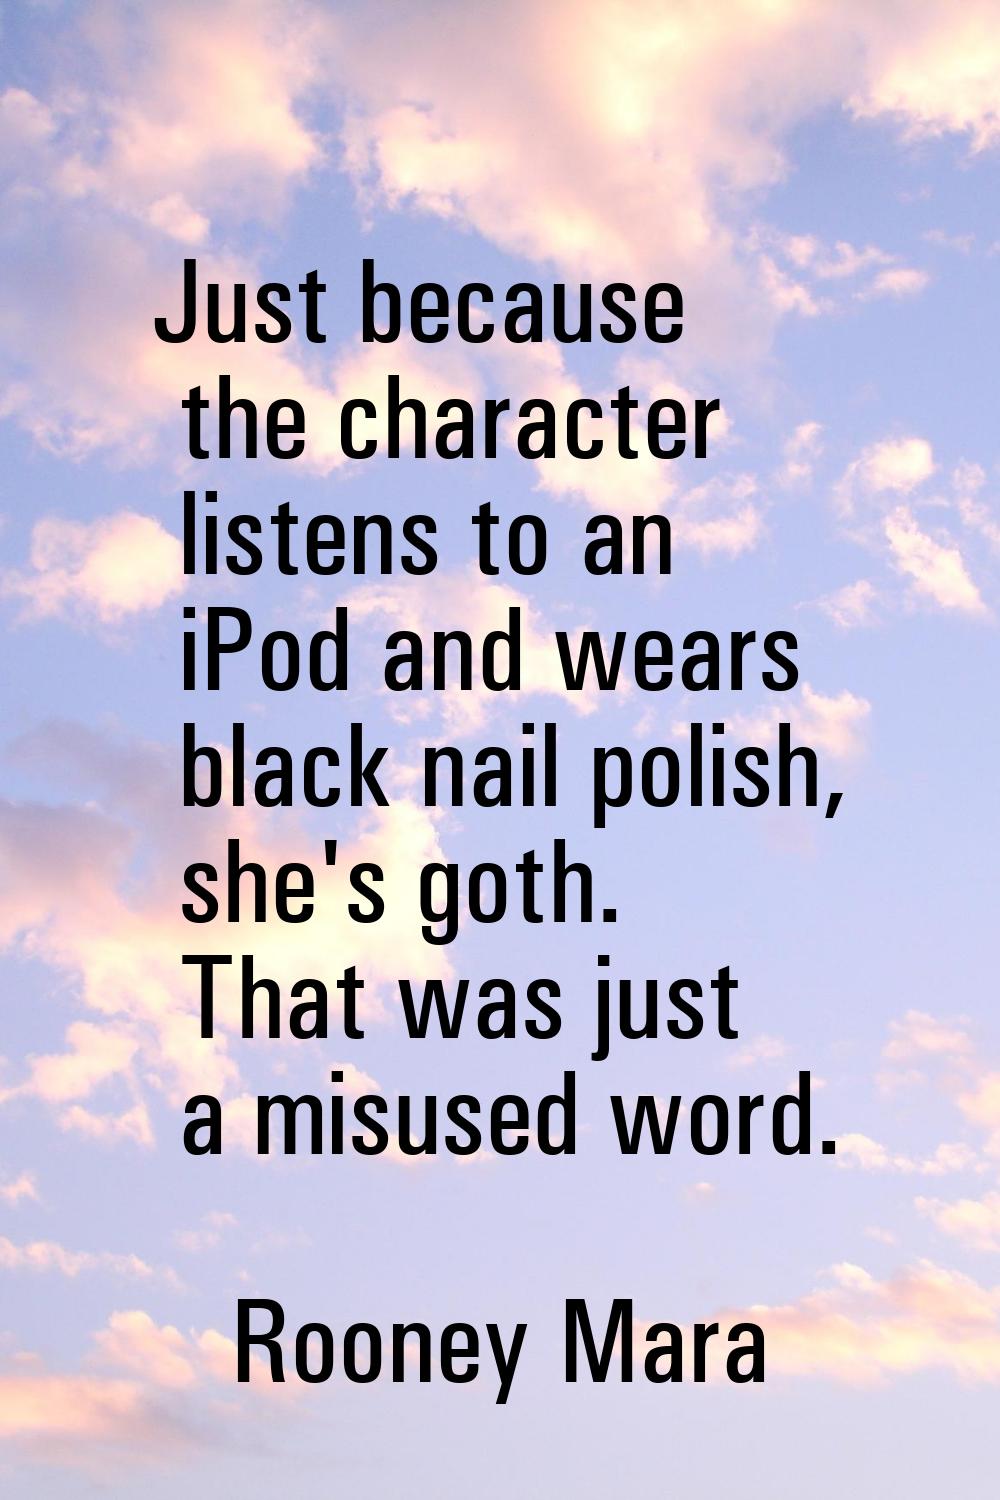 Just because the character listens to an iPod and wears black nail polish, she's goth. That was jus